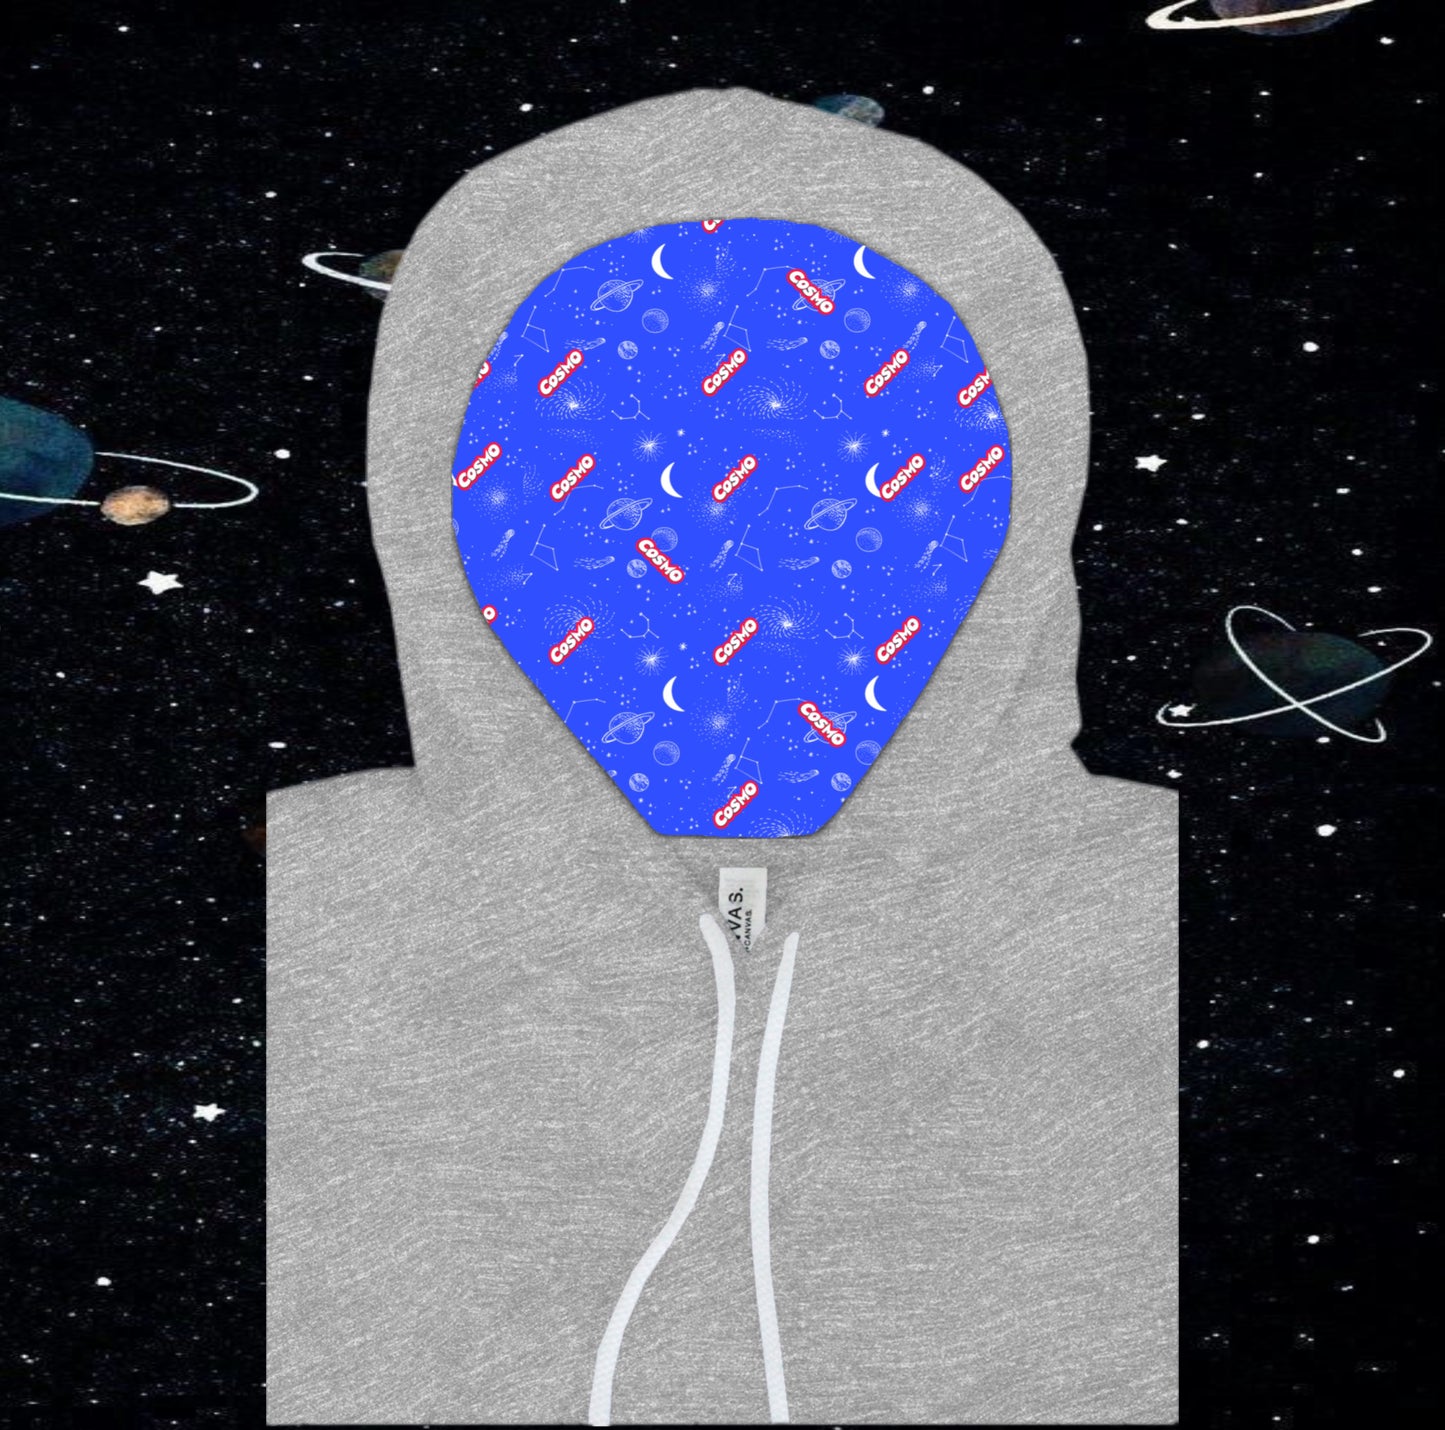 Pullover hoodie- space ace